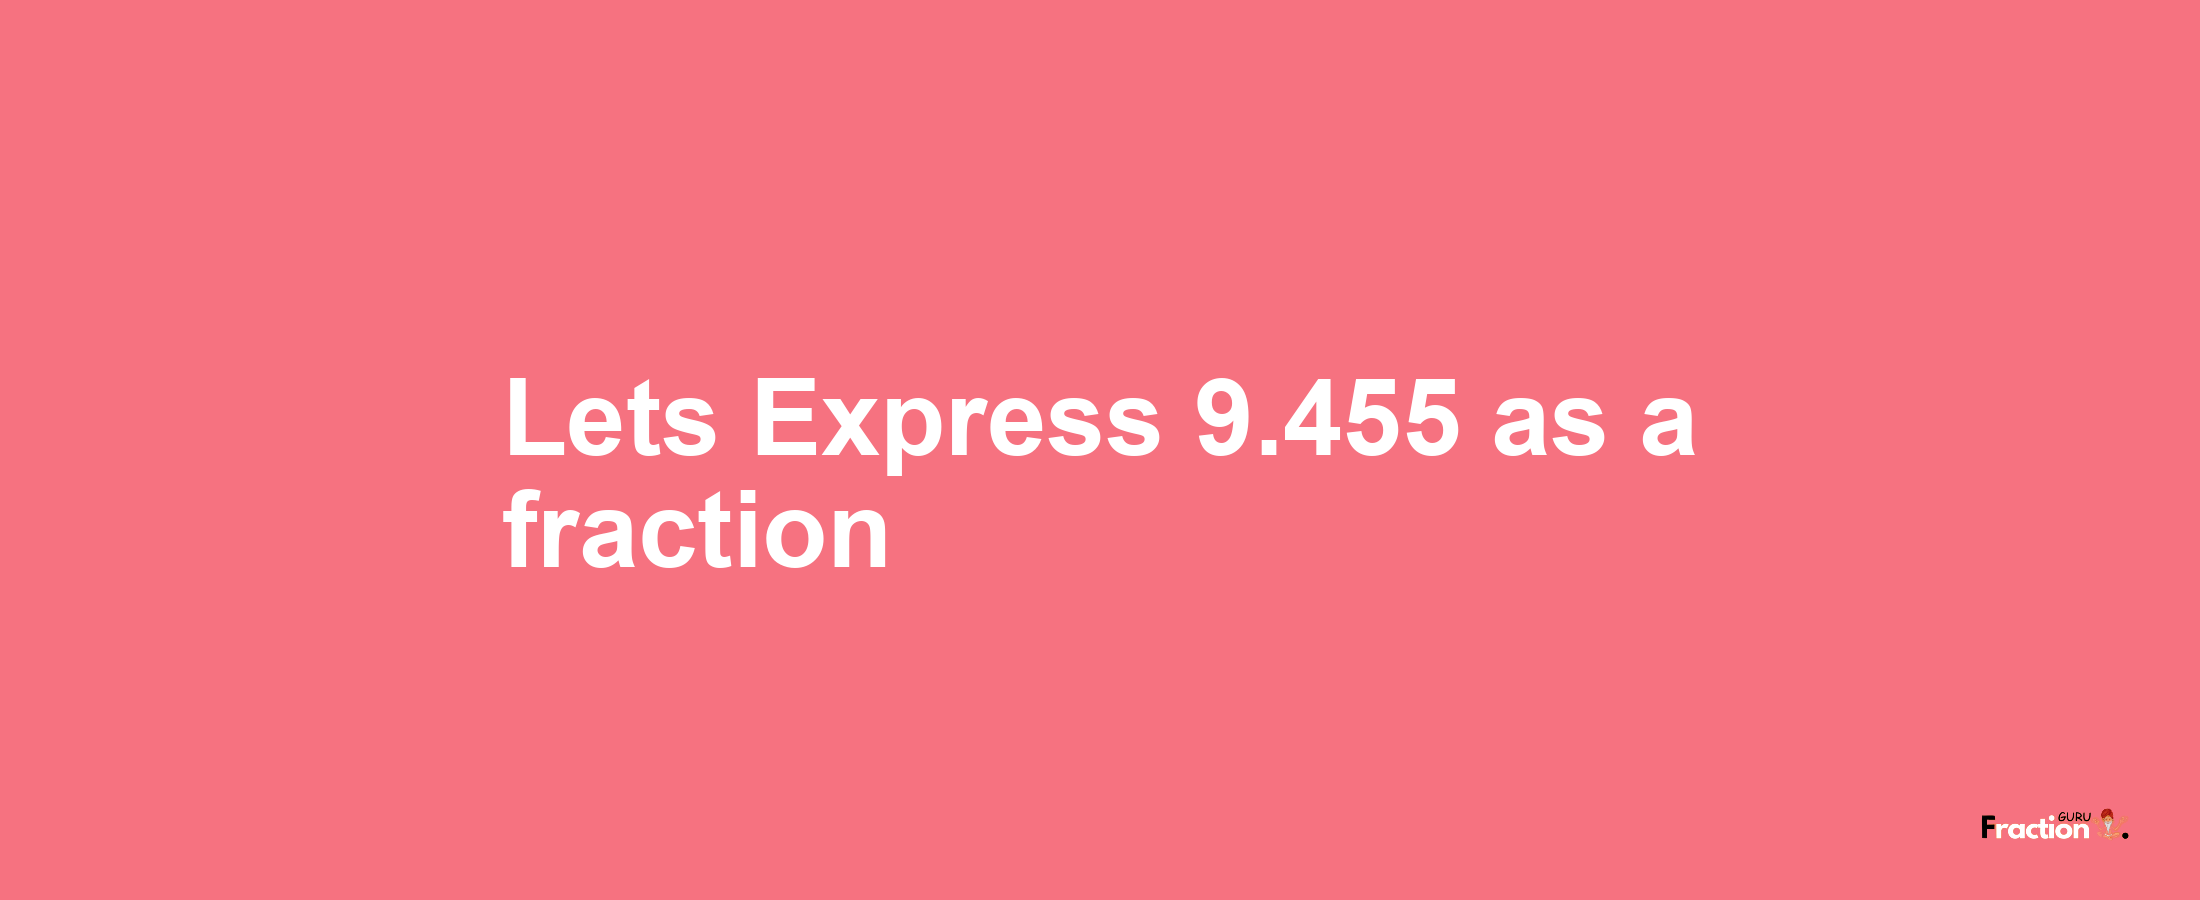 Lets Express 9.455 as afraction